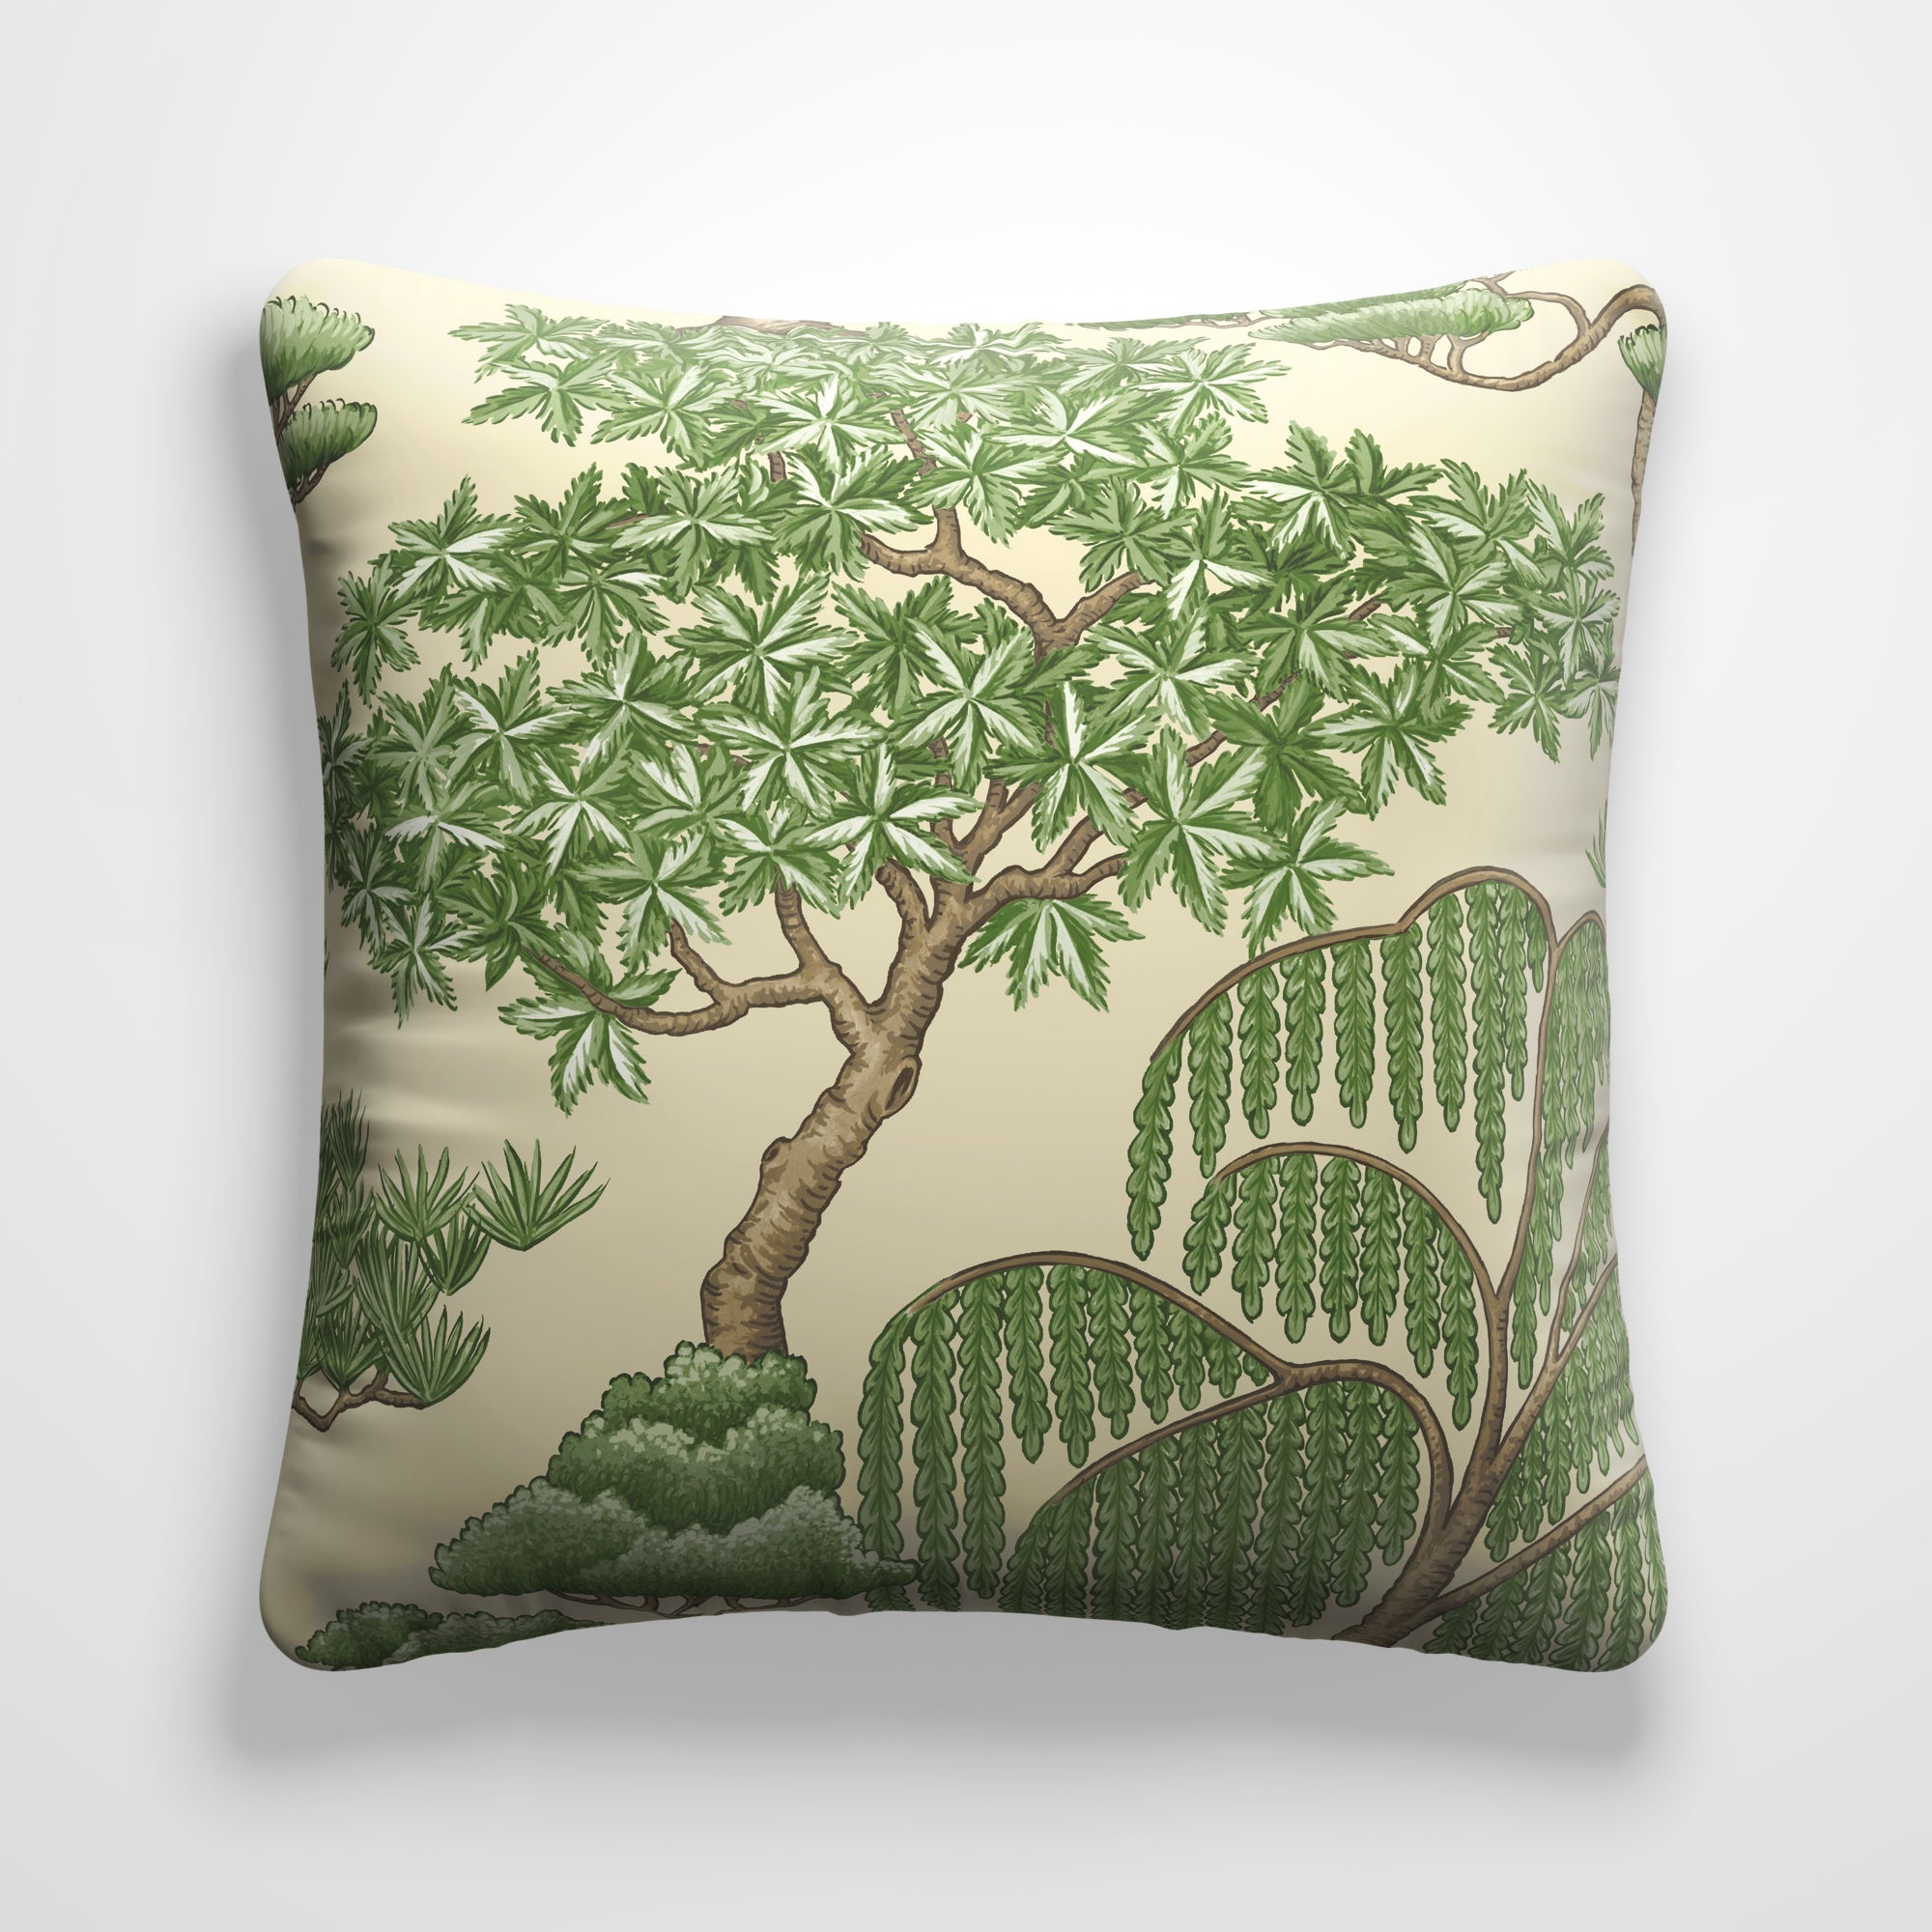 Nihon Made to Order Fire Retardant Cushion Cover Nihon Forest